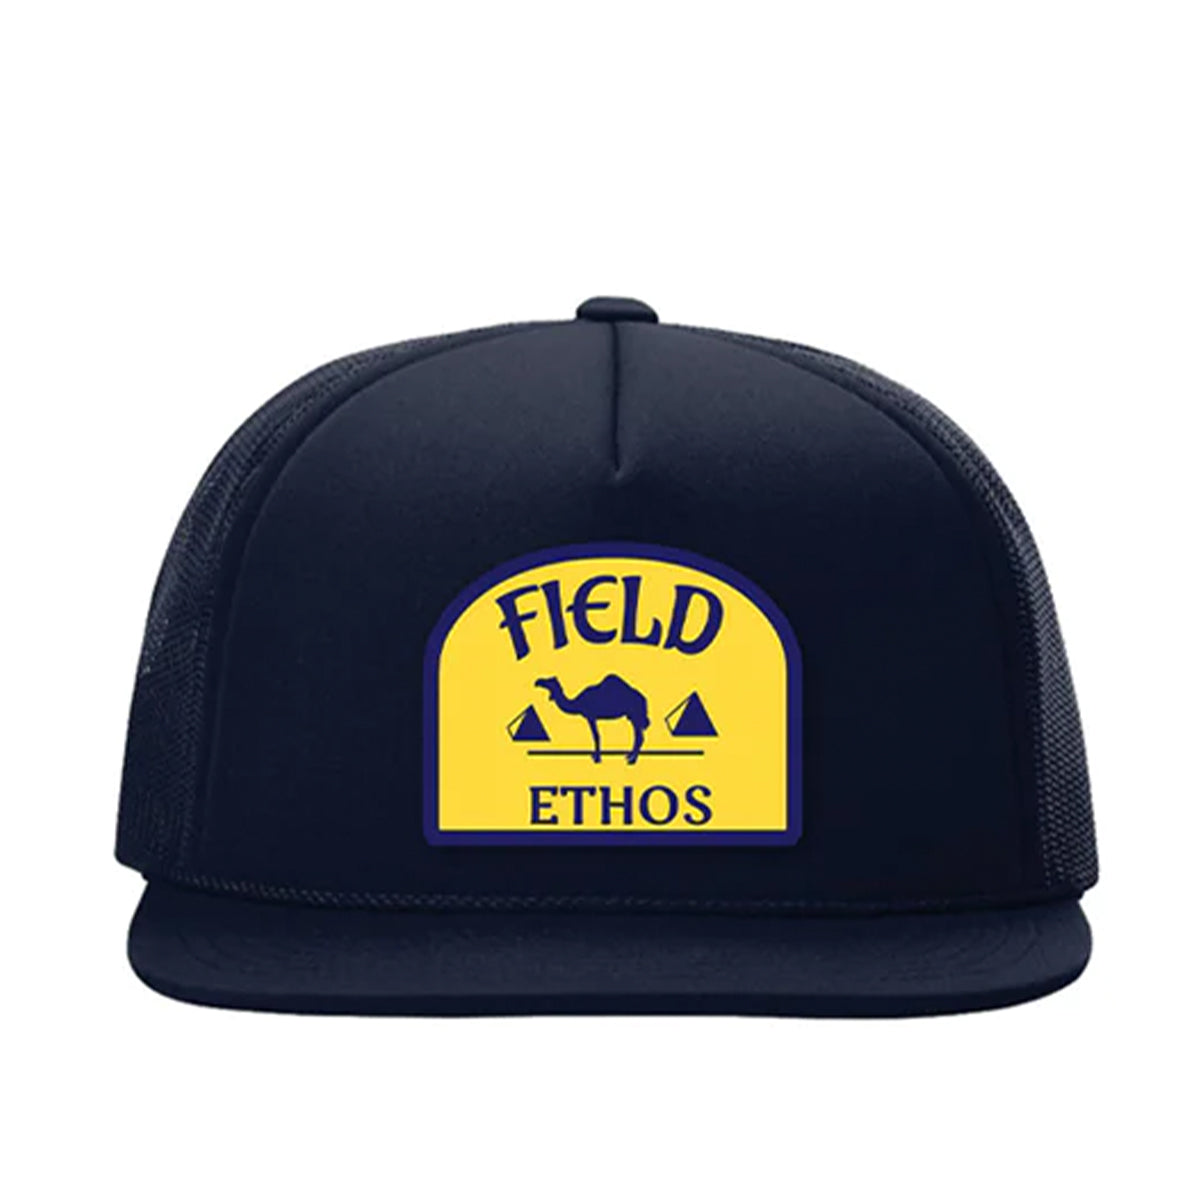 Journal – Field Field The Ethos Hat Ethos Rover